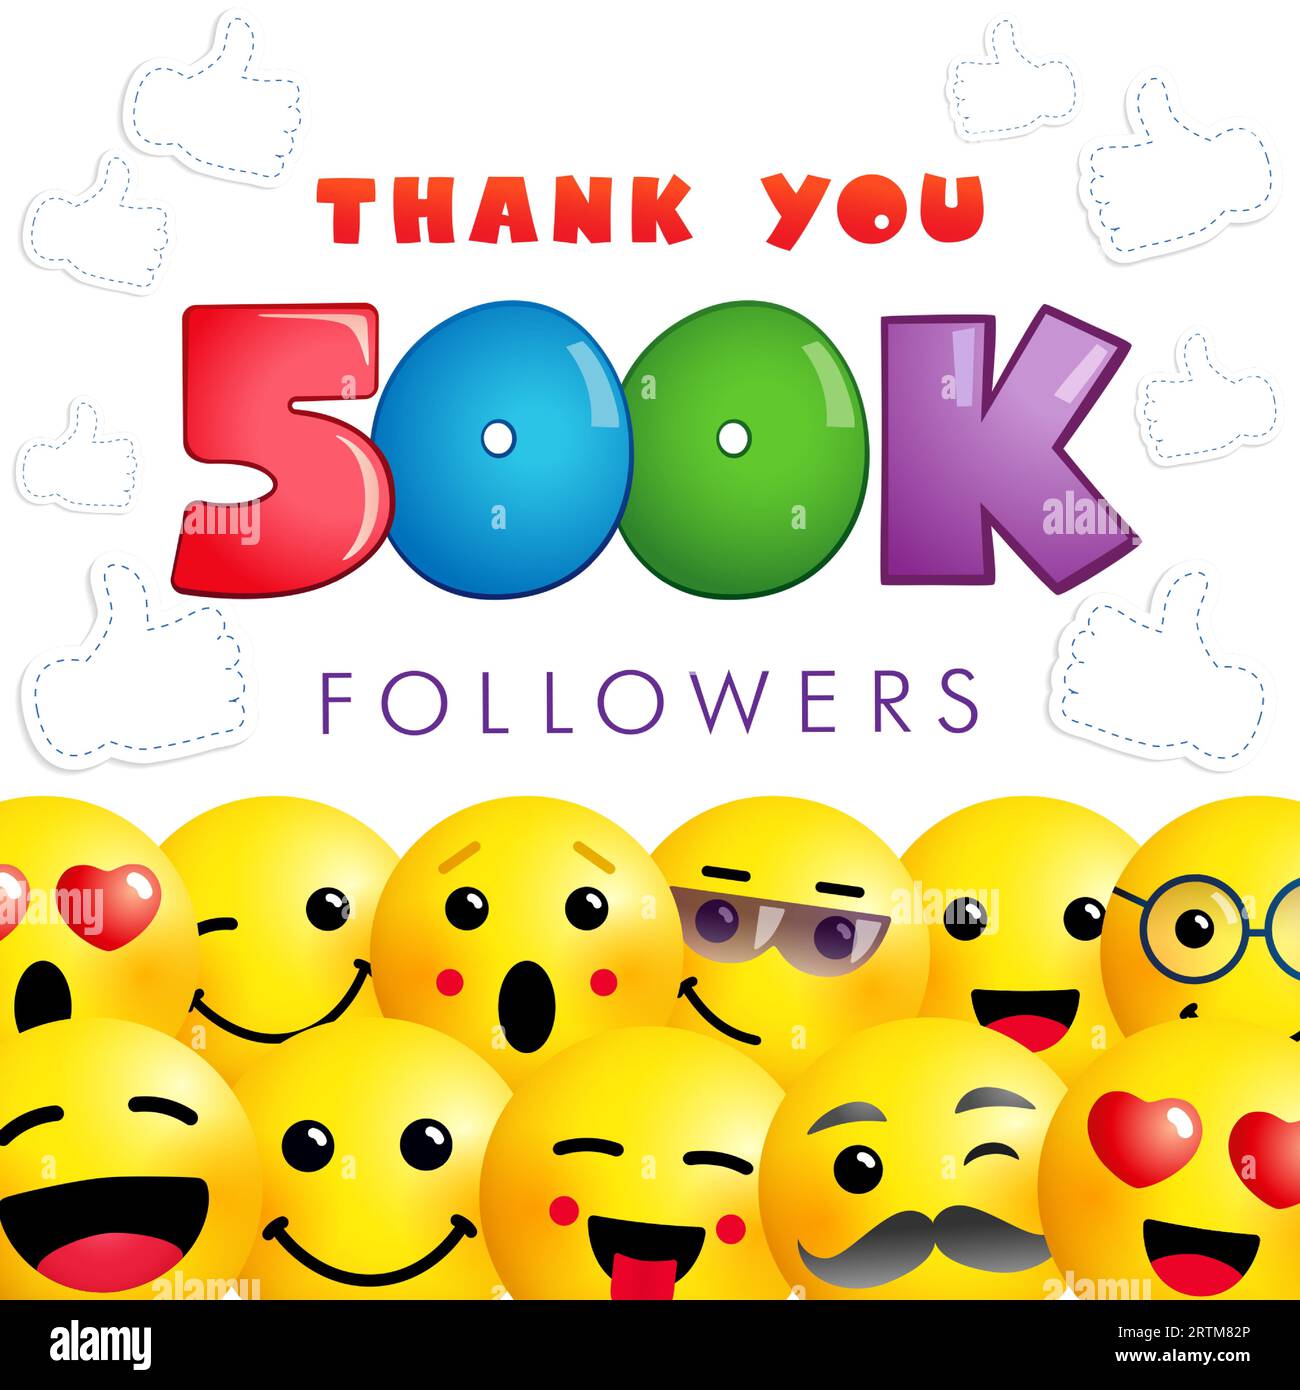 Thank you 500K followers social media greetings. Set of 3D emoticons. Positive thanks for 500 K following people. 500 000 likes congrats with yellow f Stock Vector